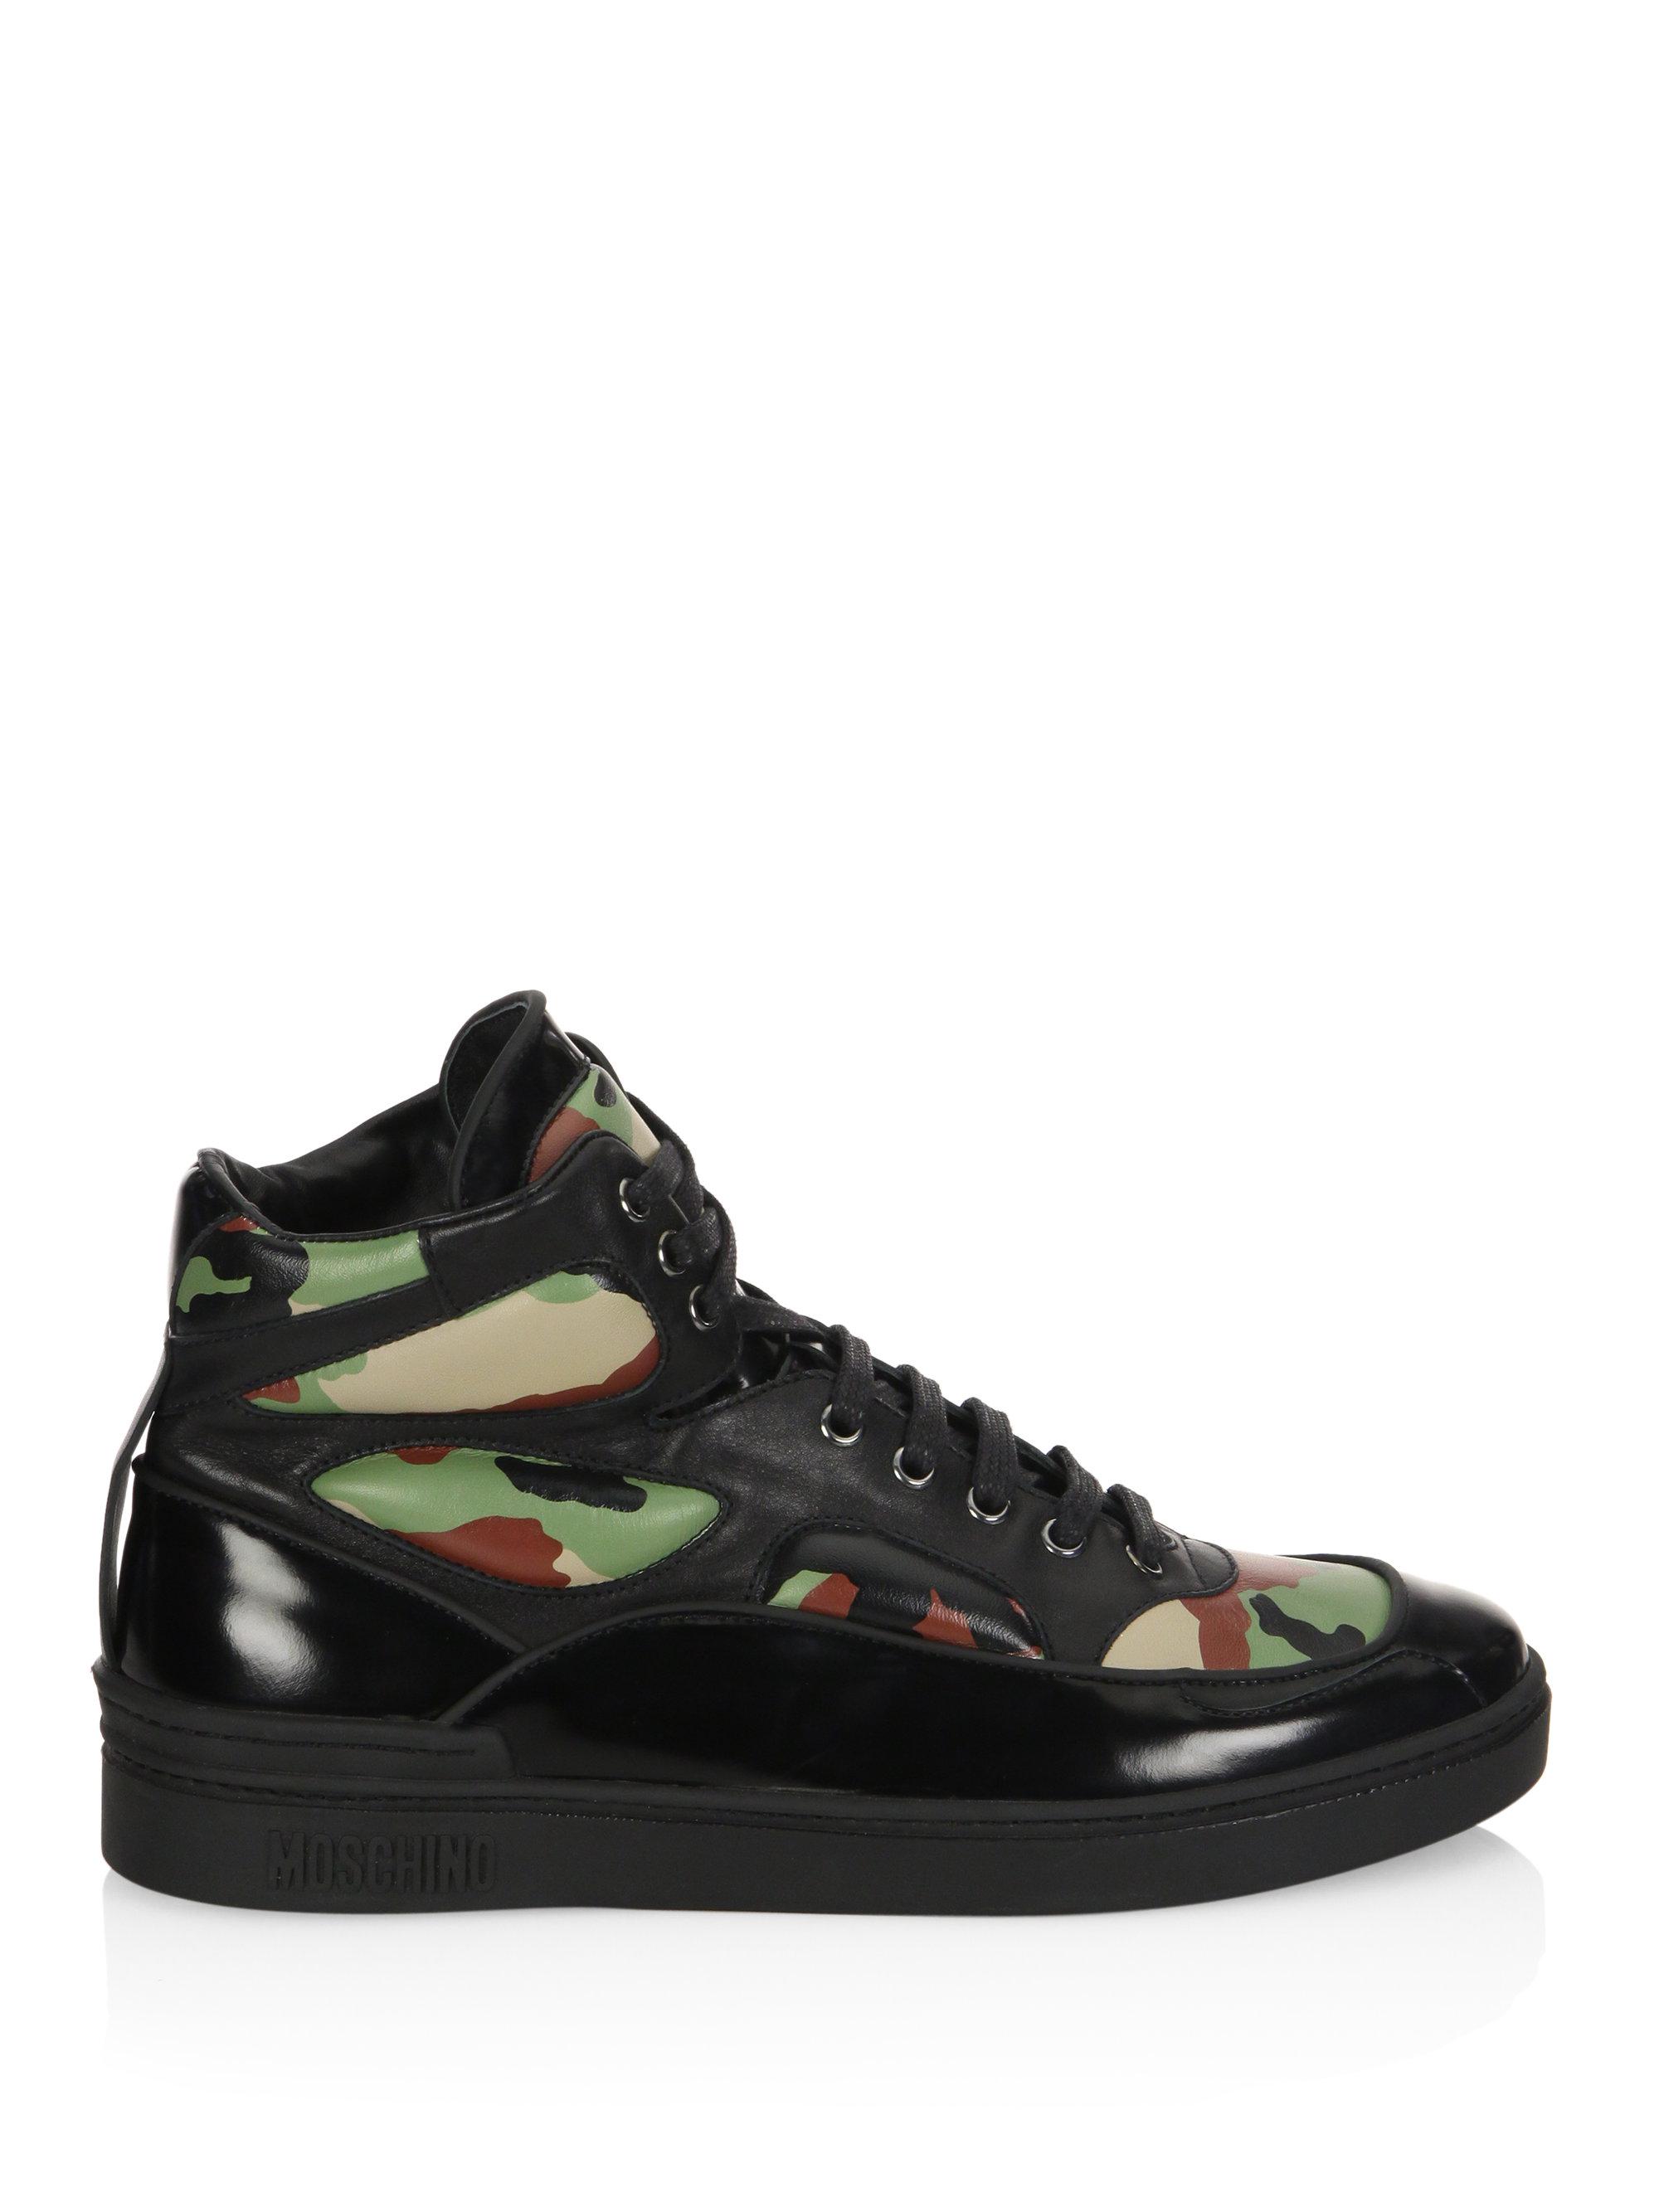 Moschino Camo Leather High Top Sneakers in Black for Men - Lyst